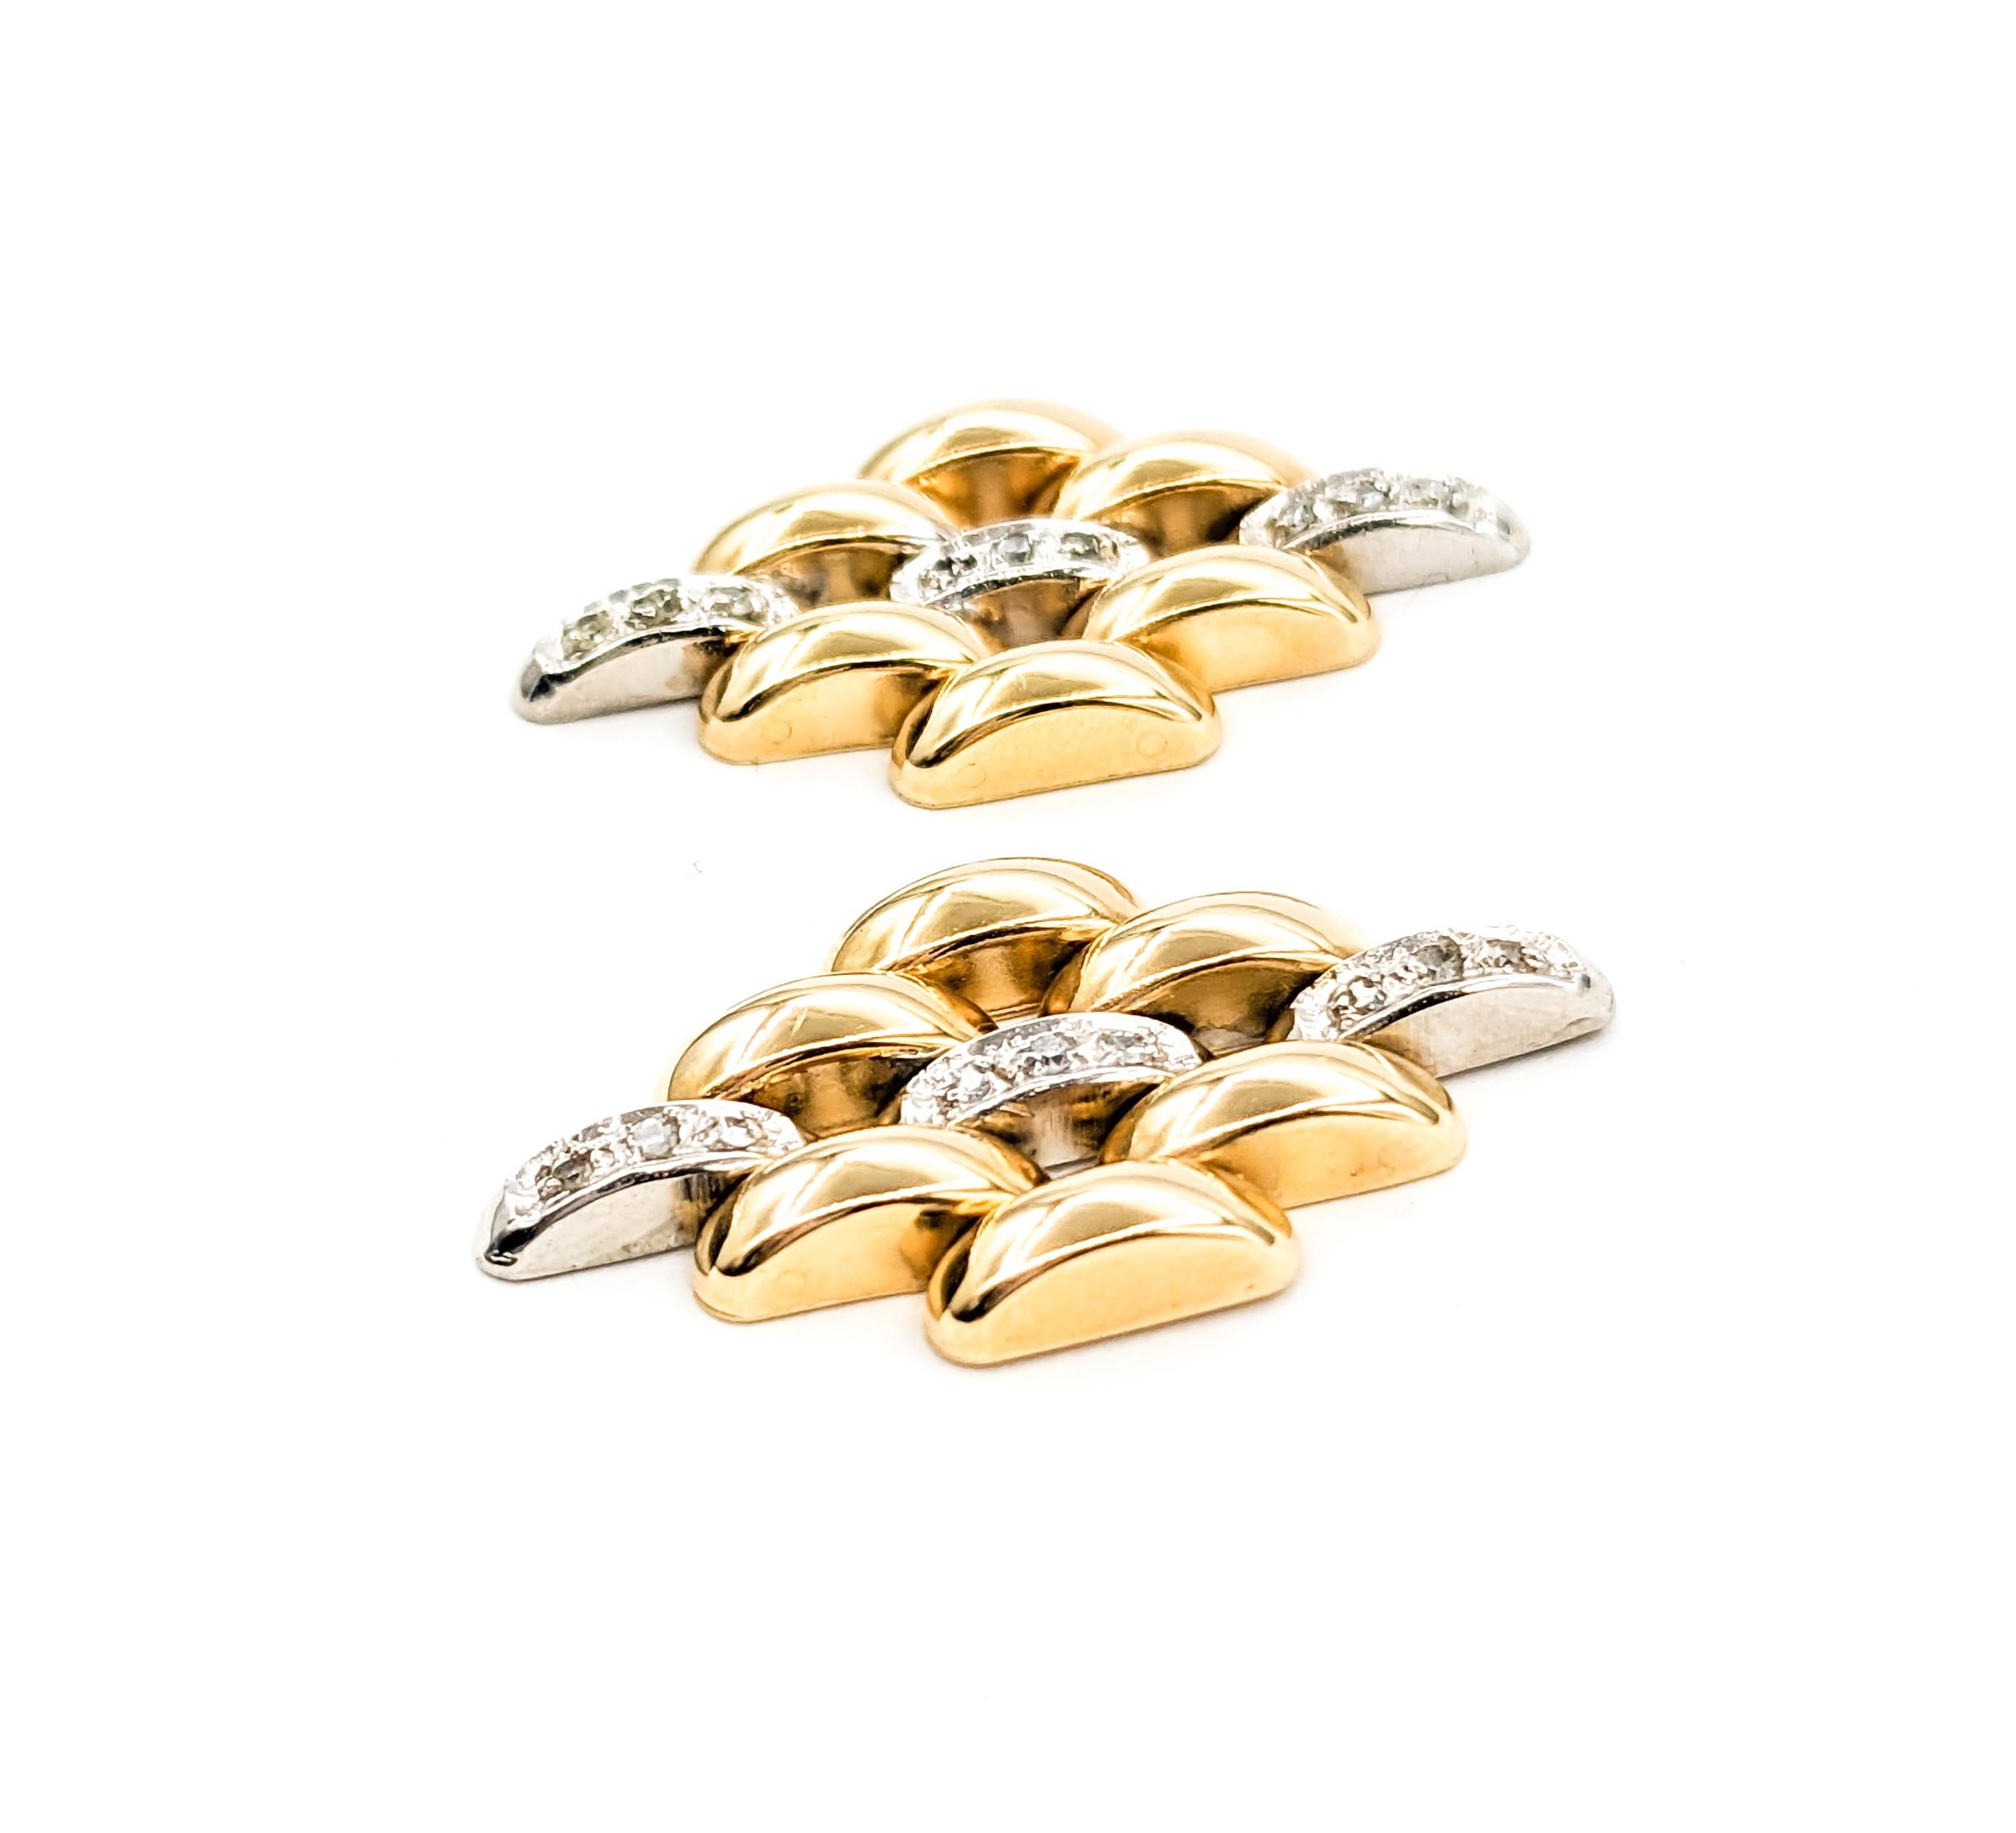 Diamond & 14K Gold Panther Link Earrings zin TZwo-Tone Gold



Introducing the Diamond & 14K Gold Panther Link Earrings, a retro-inspired masterpiece meticulously crafted in 14kt two-tone gold. These stunning earrings are adorned with .10ctw